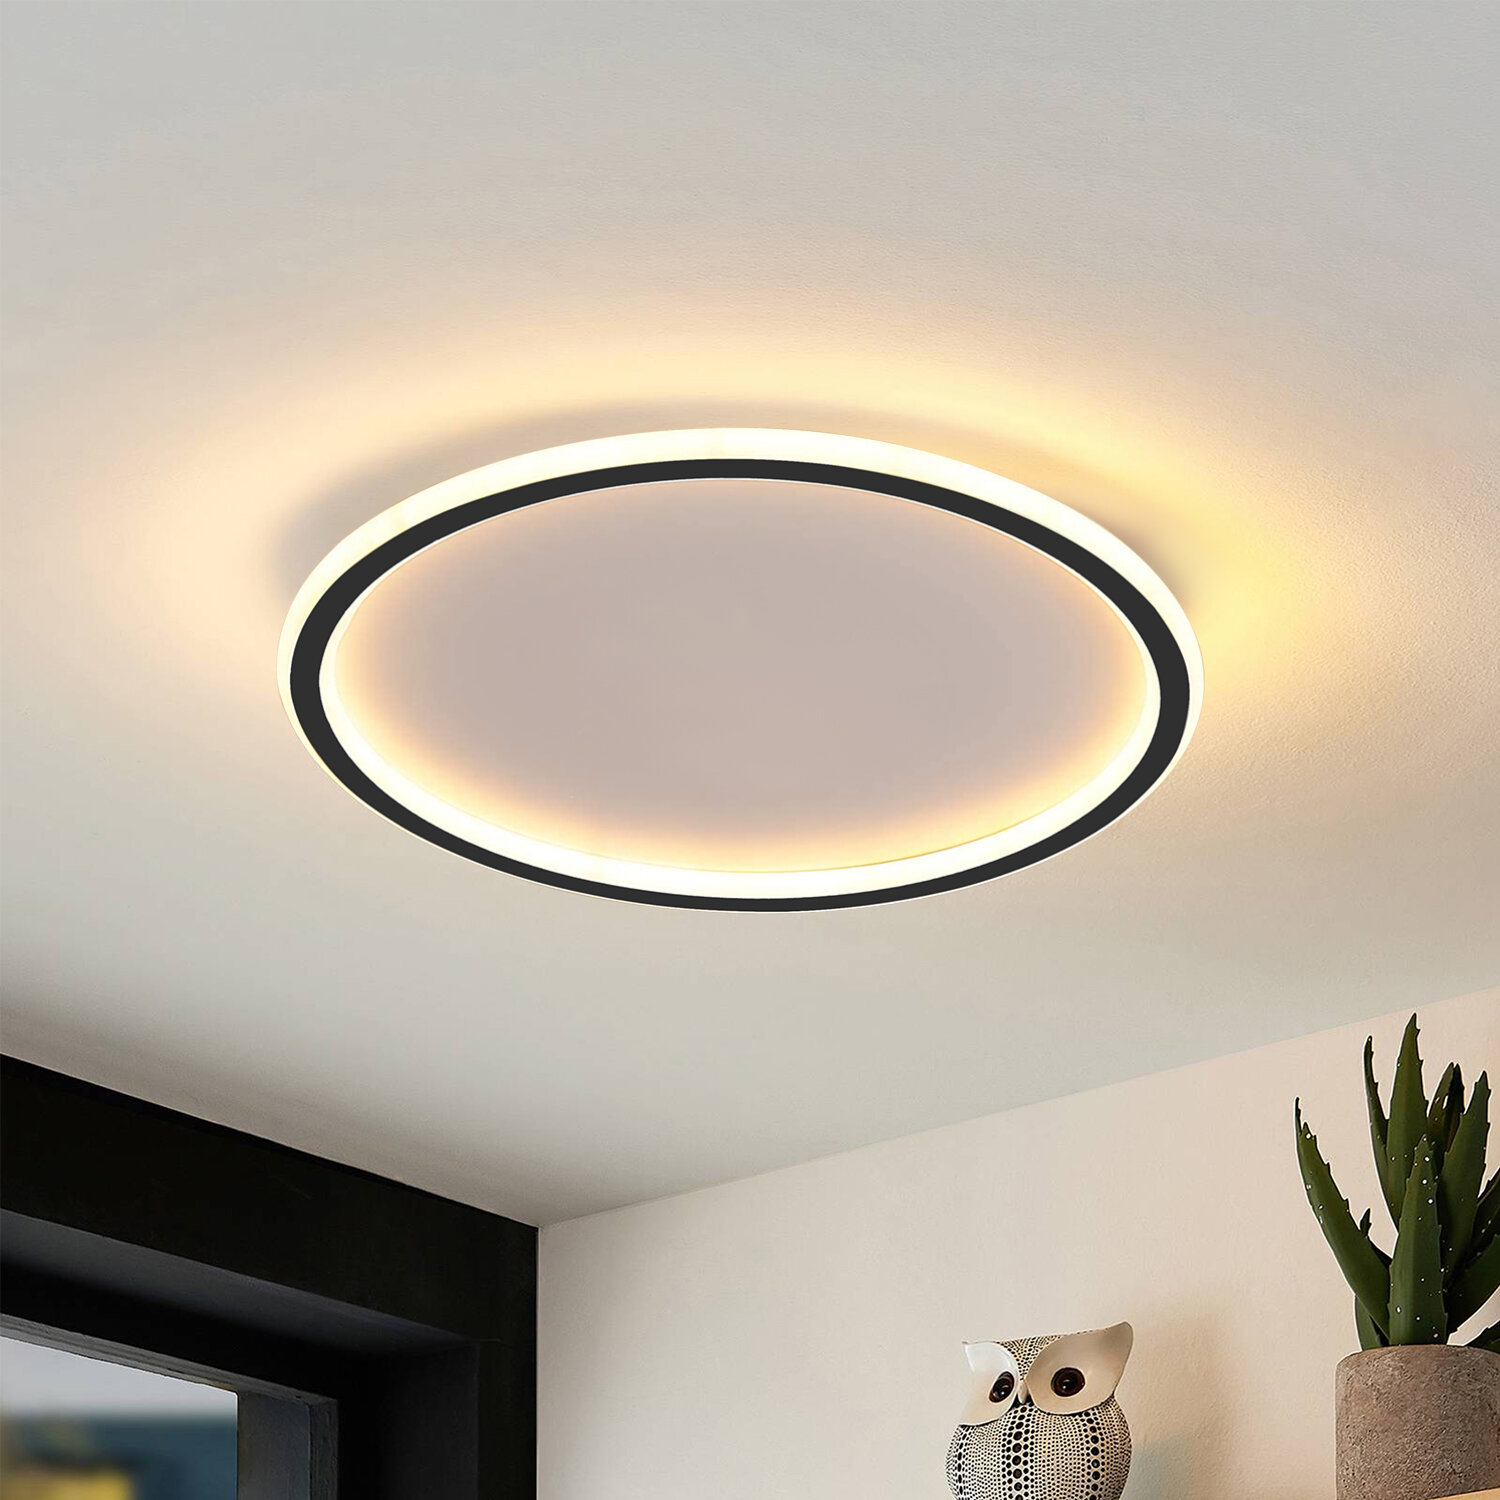 Perspections 59cm Led Integrated Ceiling Light 